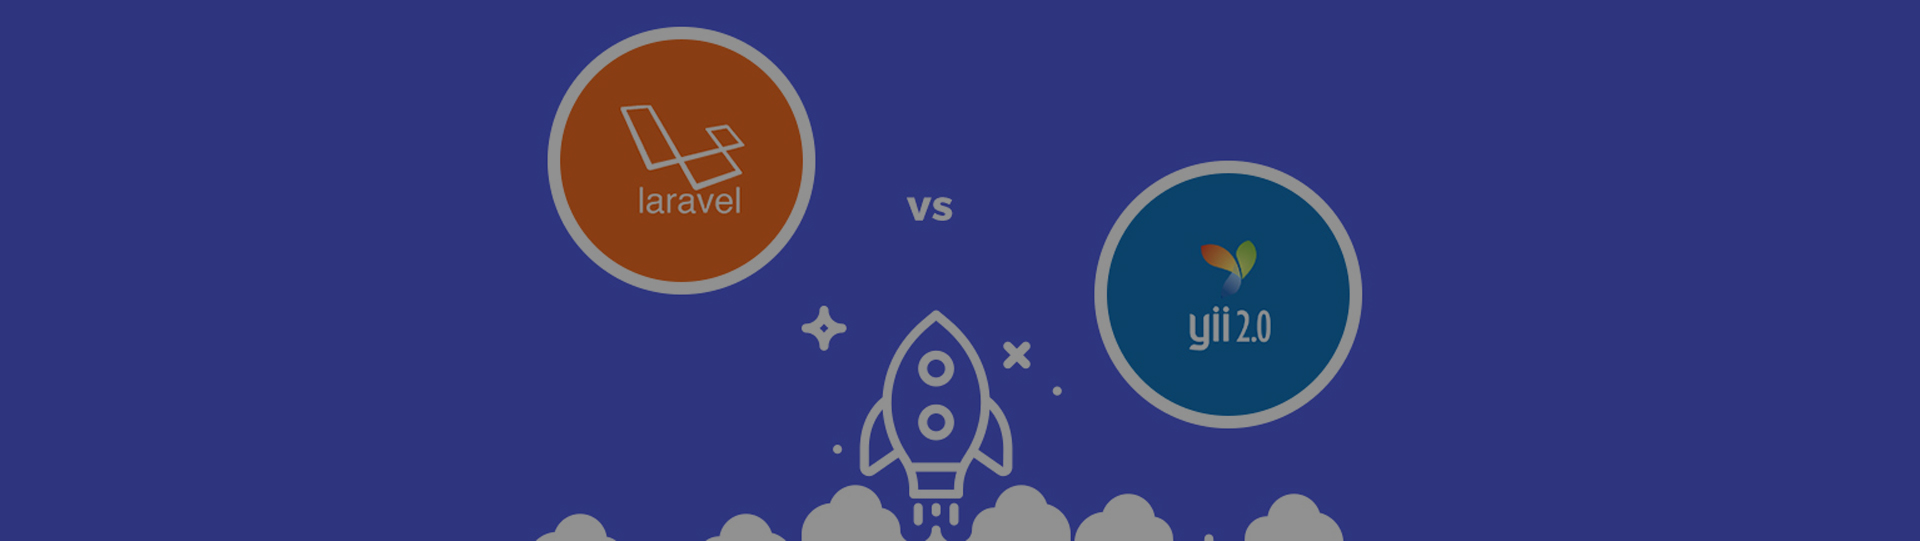 Laravel vs Yii framework: which one is best PHP framework for on demand delivery application